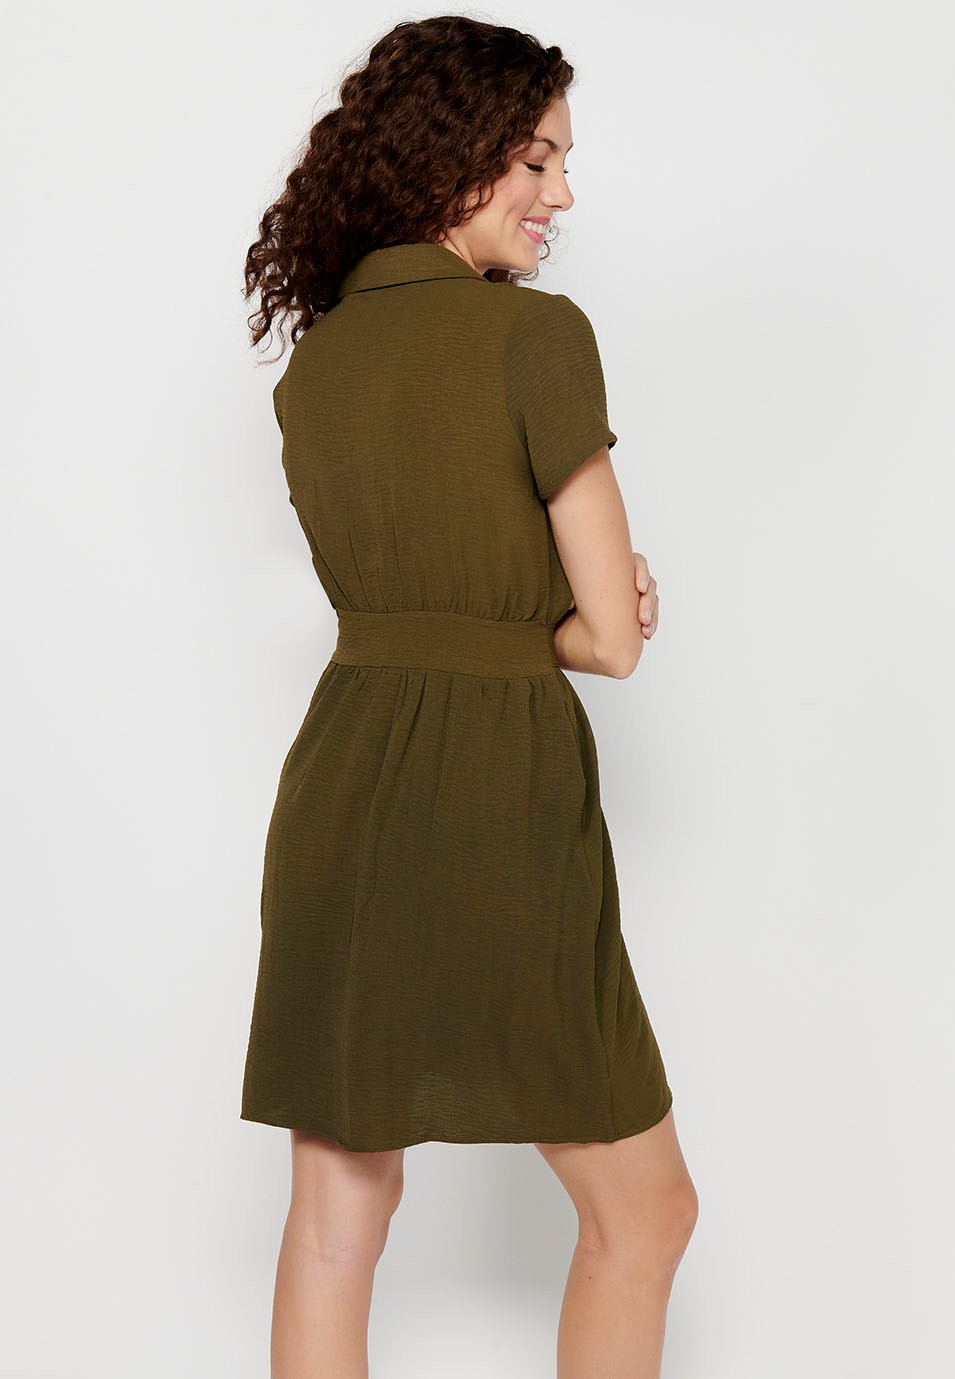 Khaki Short Sleeve Dress with V-Neck and Tight Waist for Women 8